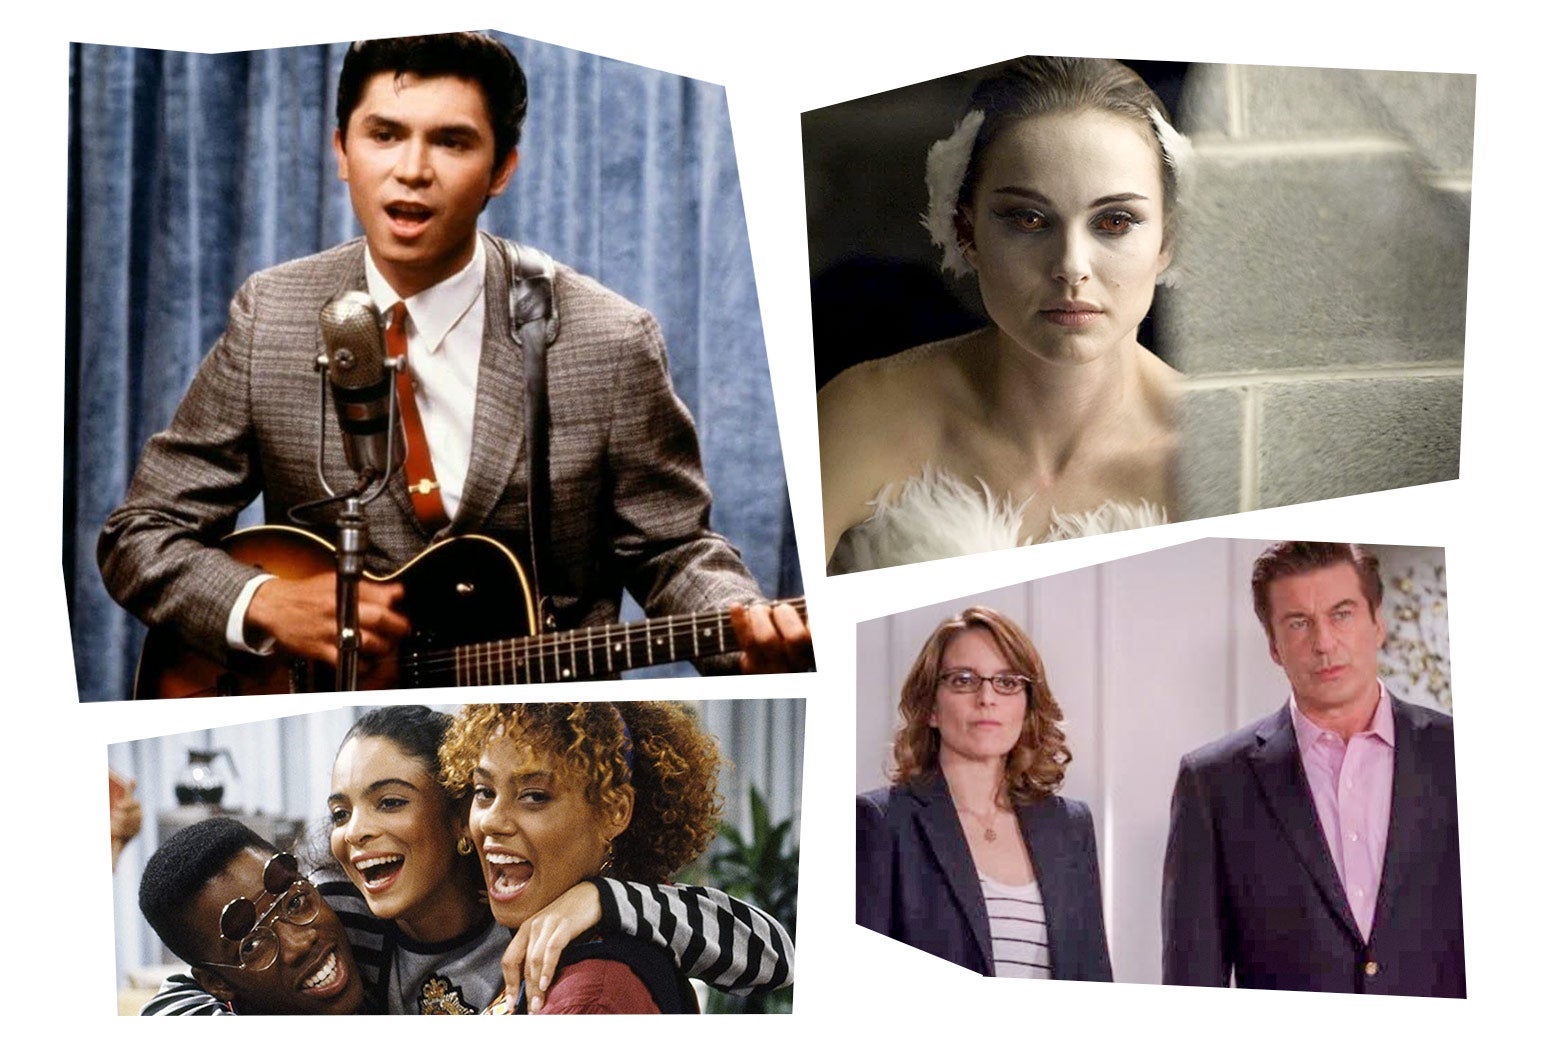 Stills of Lou Diamond Phillips playing guitar and leaning into a microphone; Natalie Portman in a mirror wearing white face paint; Jasmine Guy, Kadeem Hardison, and Cree Summer embracing; Tina Fey and Alec Baldwin standing side by side.